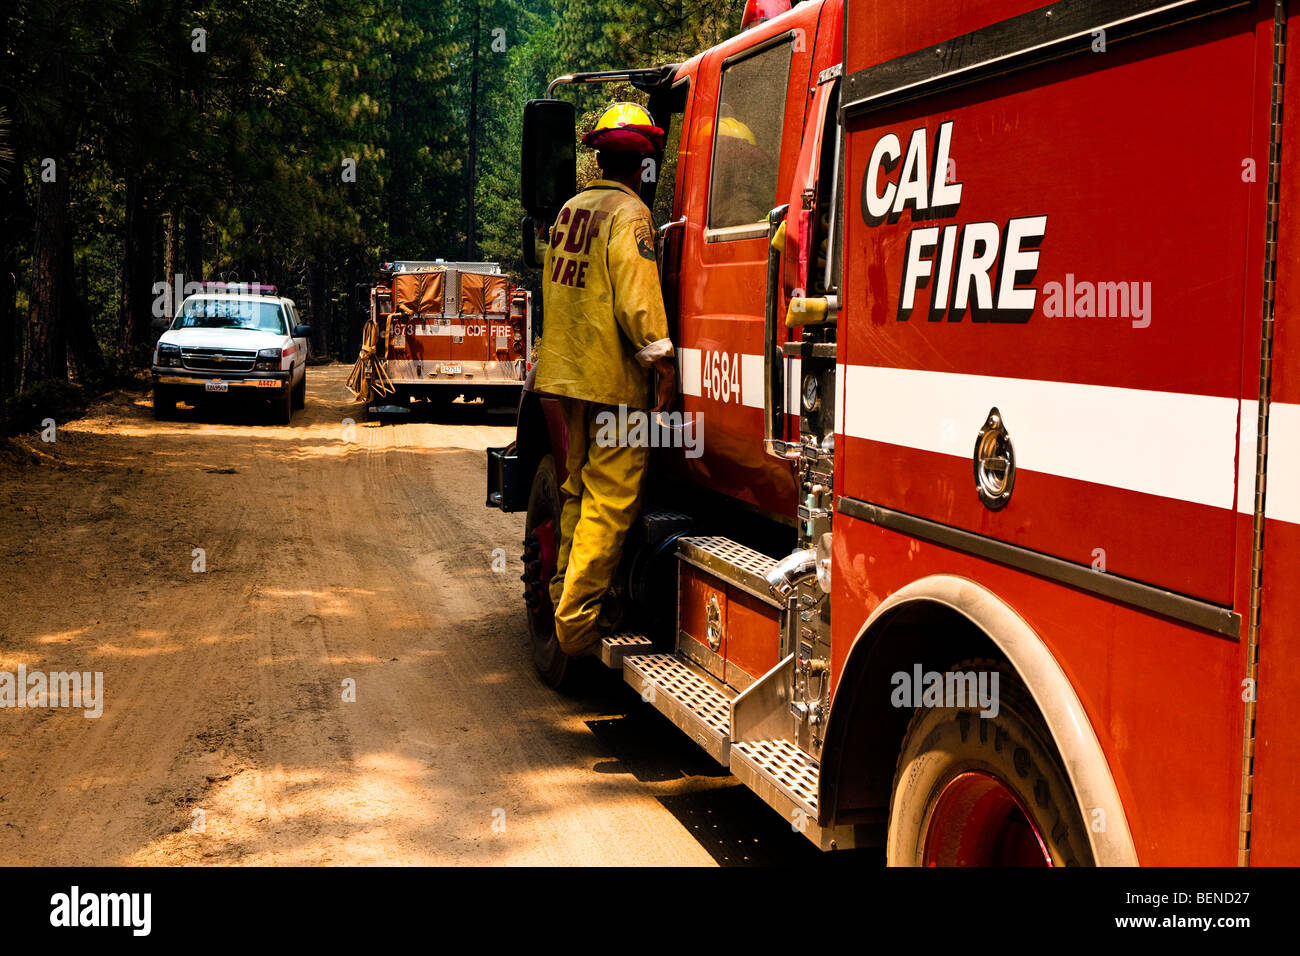 Image result for photos of cal fire trucks